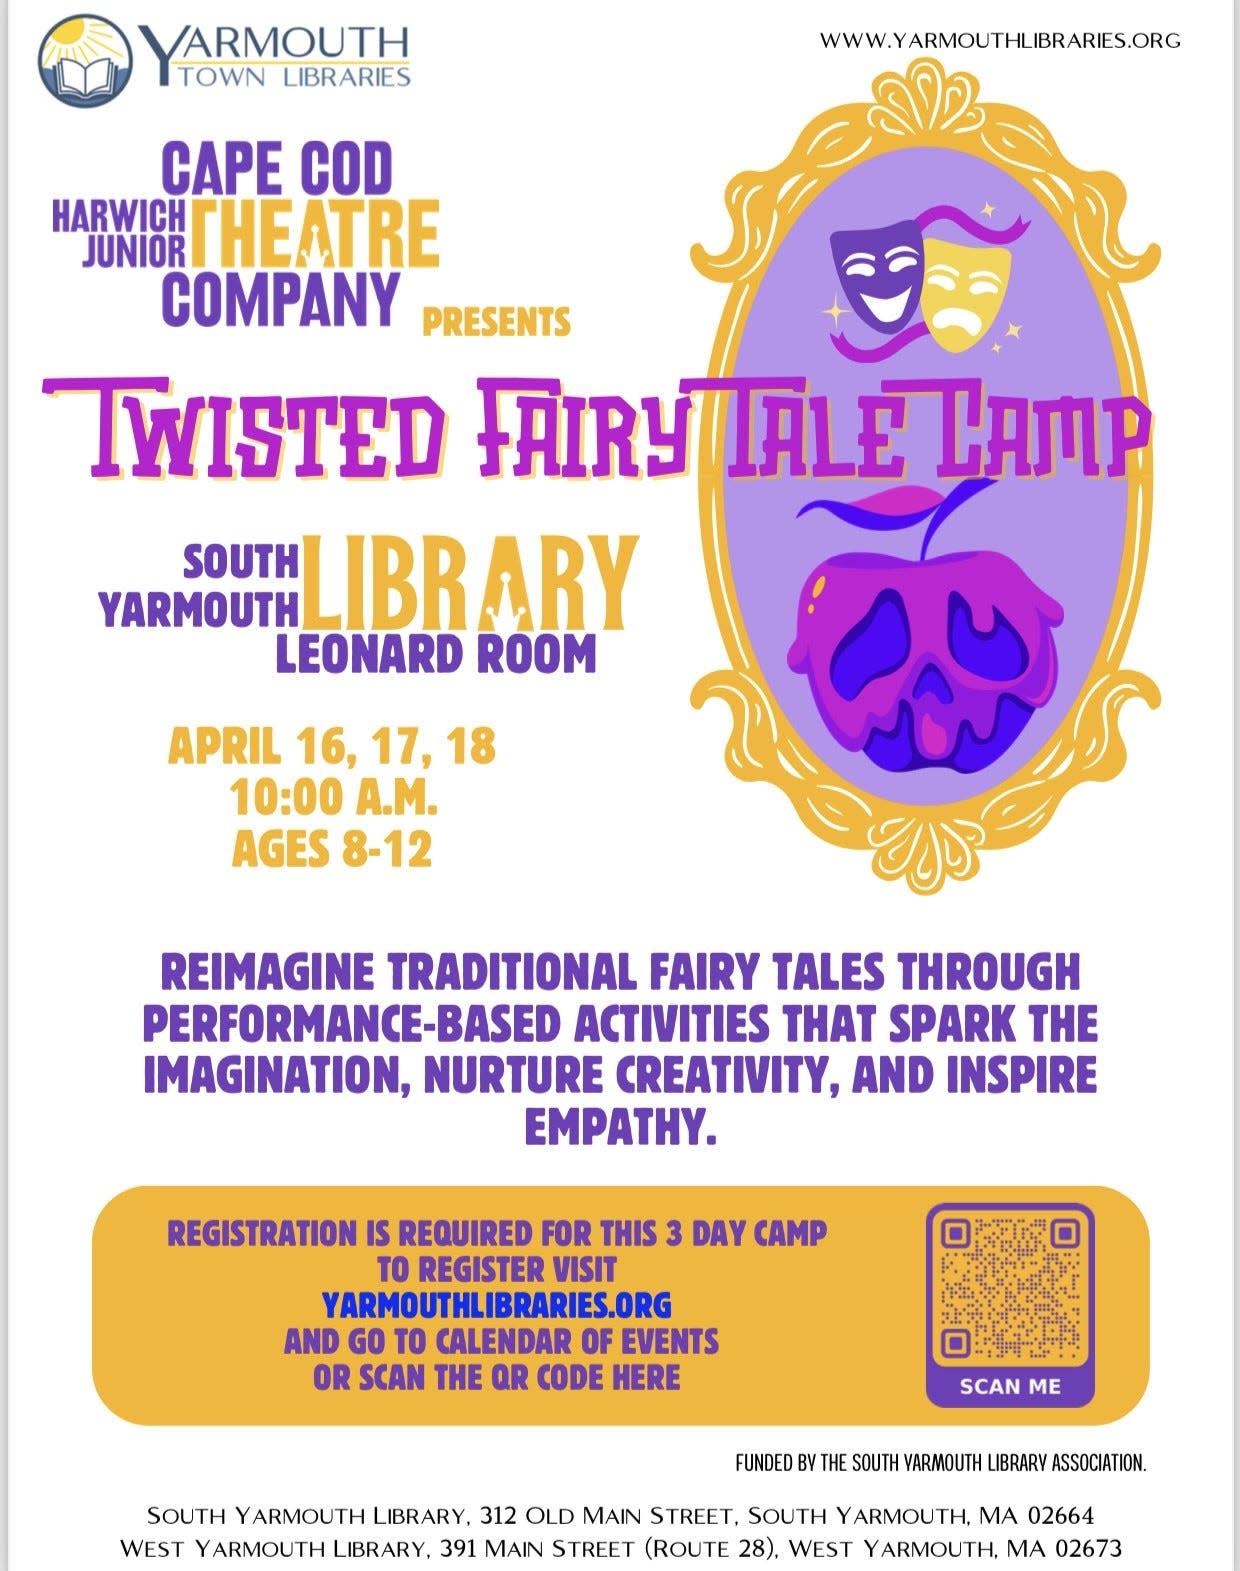 Poster for Twisted Fairy Tale Camp at the South Yarmouth Library, hosted by the Harwich Jr Theatre.